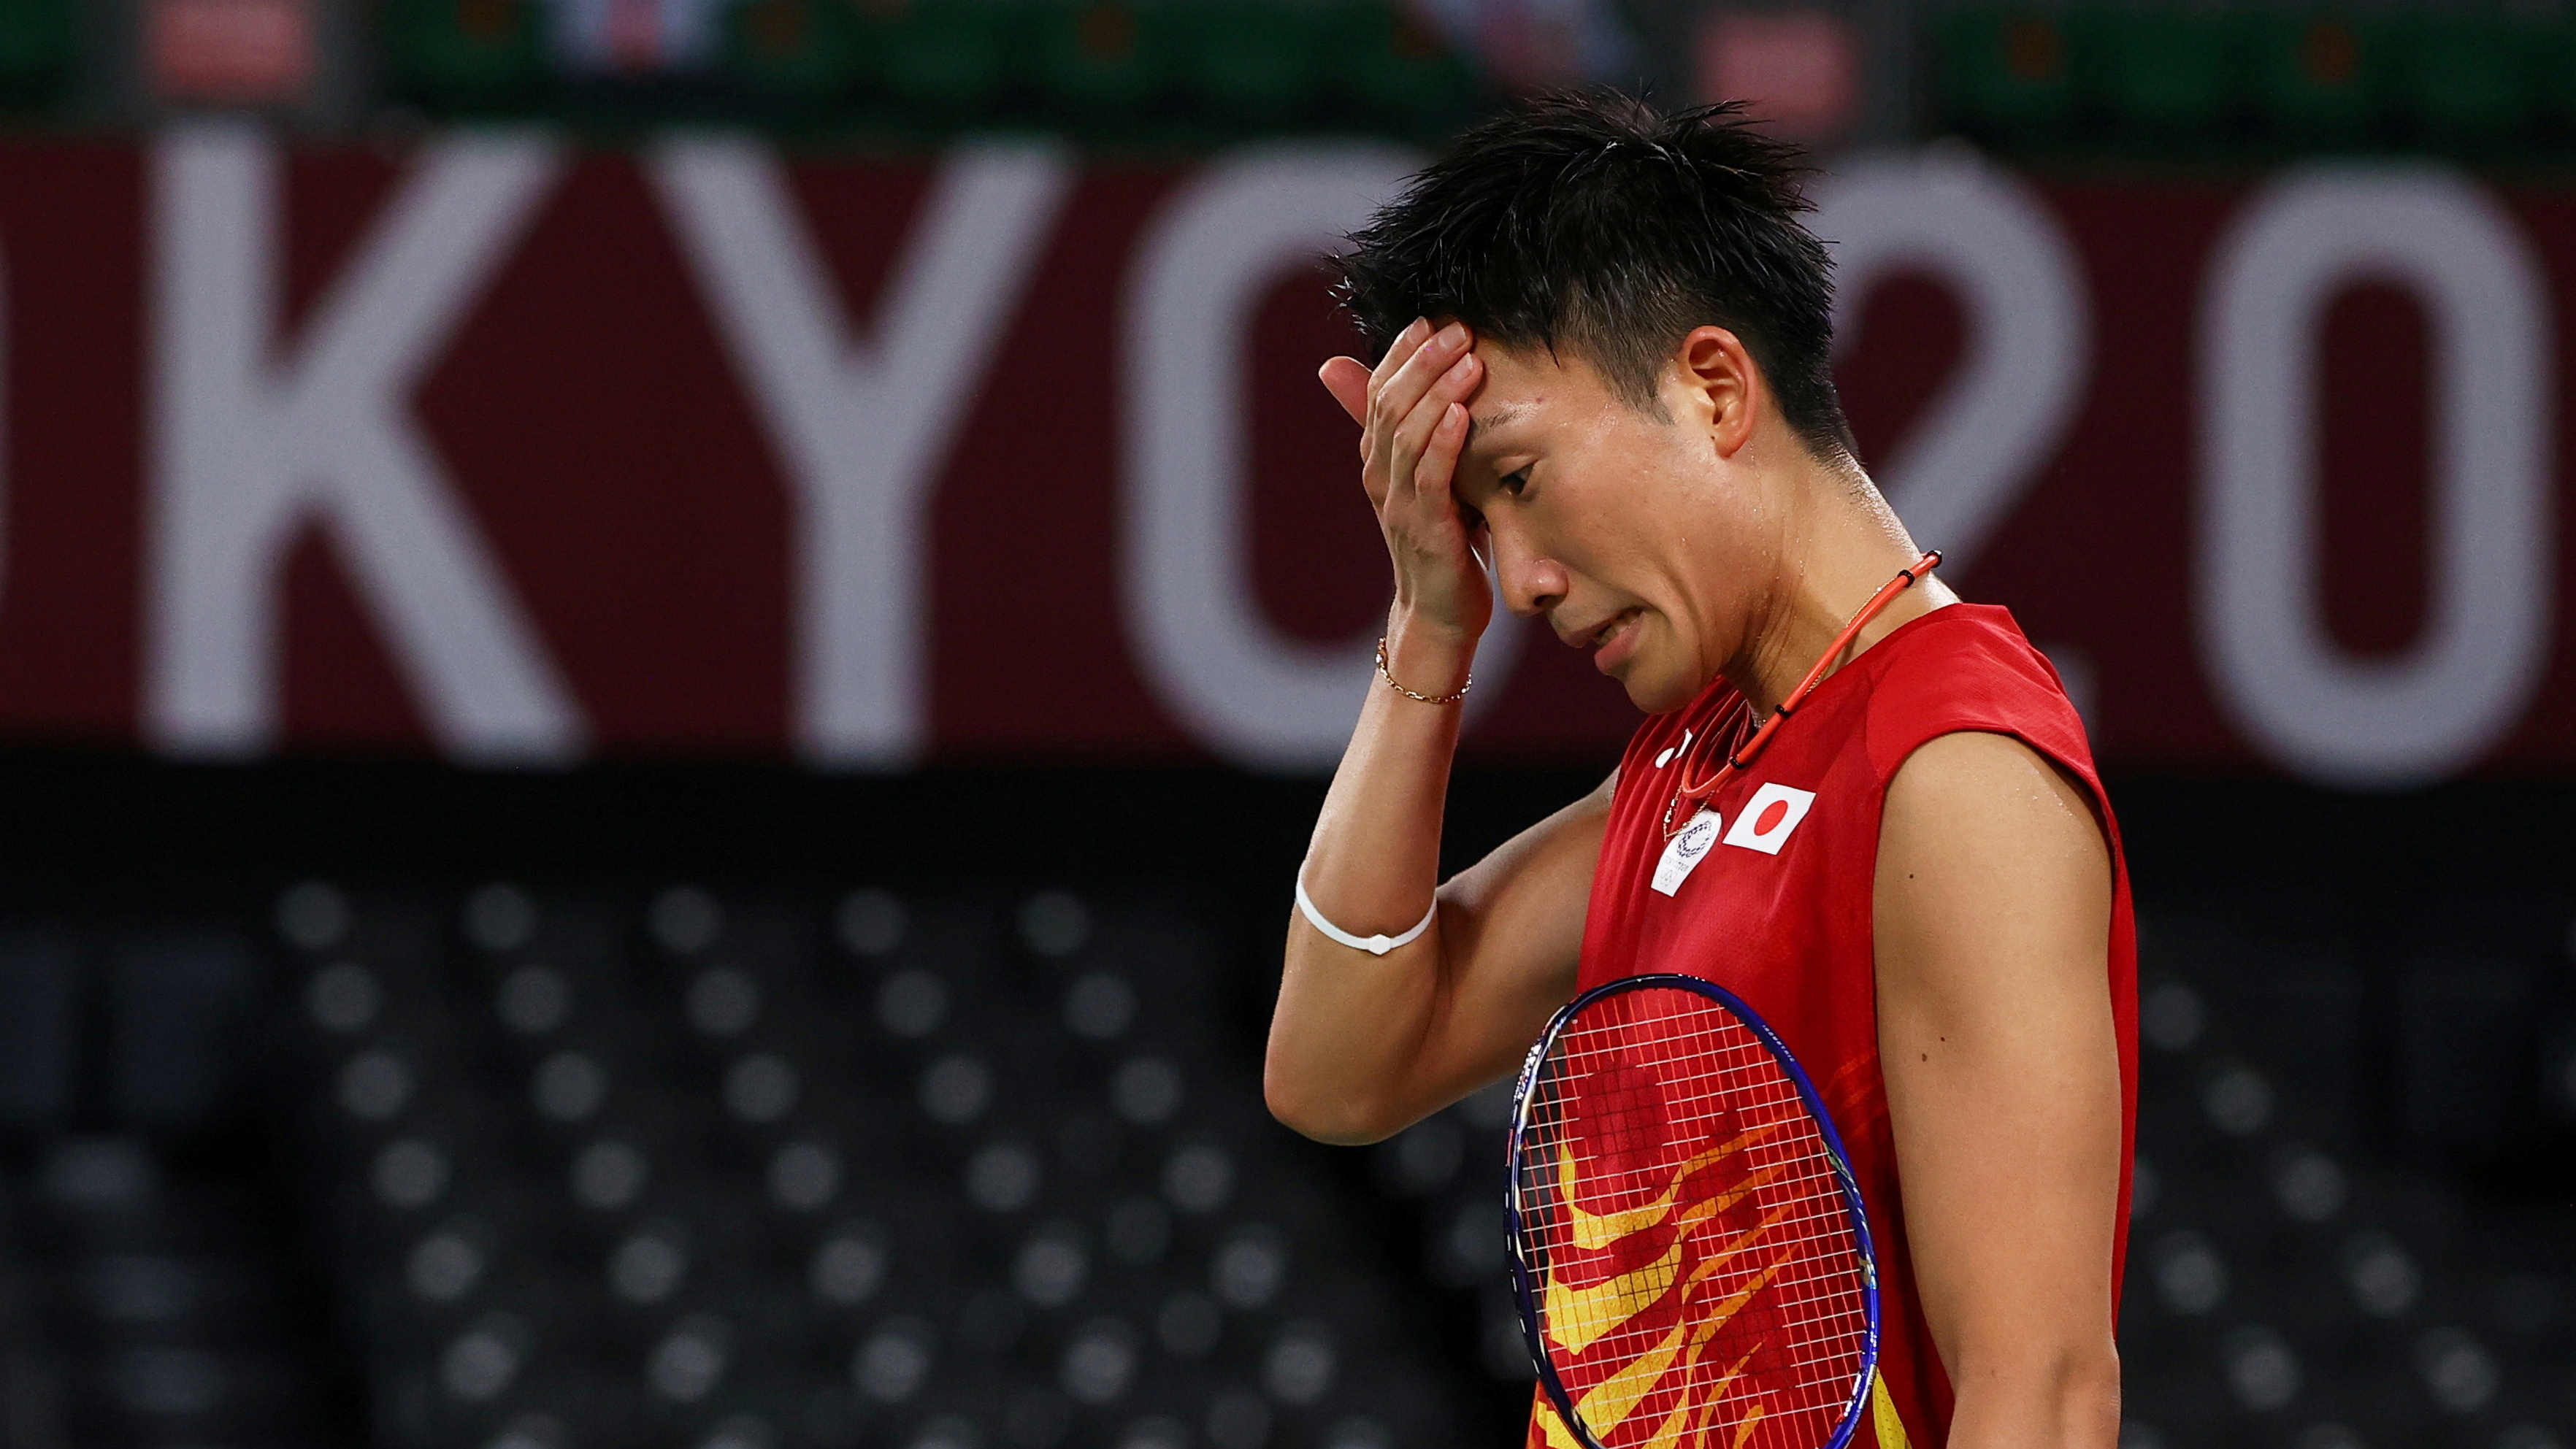 Kento Momota of Japan reacts during the match against Heo Kwang-Hee of South Korea in the Tokyo 2020 Olympics. REUTERS/Leonhard Foeger/File Photo